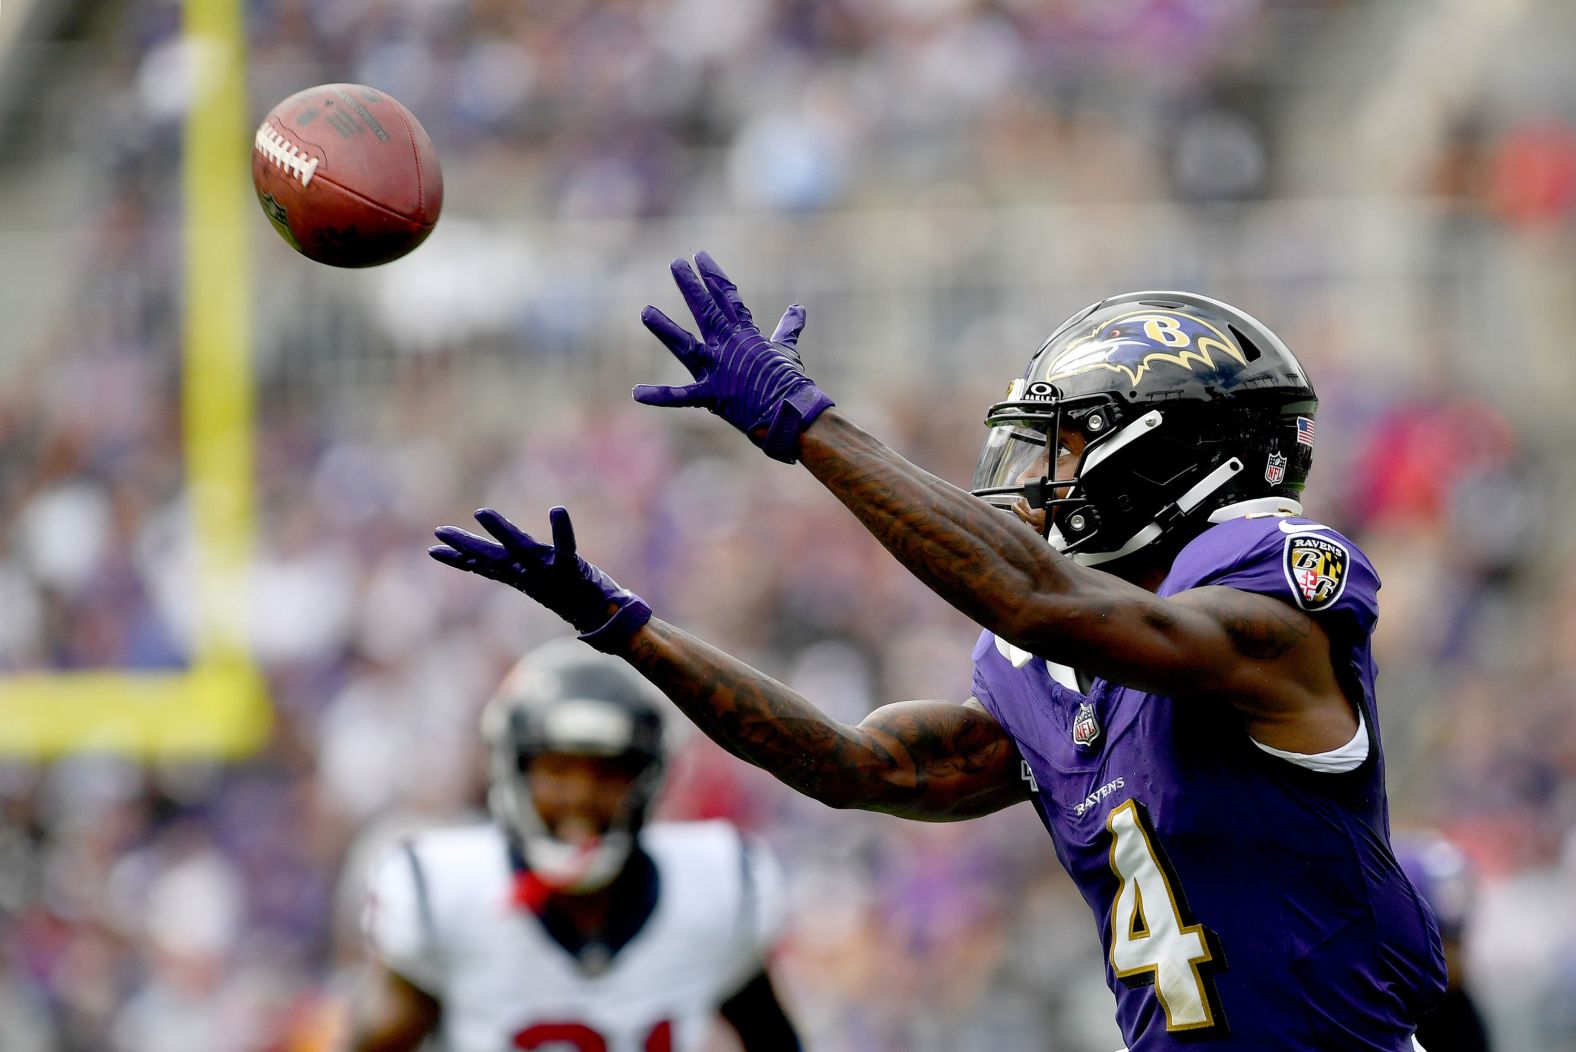 Baltimore Ravens wide receiver/punt returner Zay Flowers catches a deep pass in the first quarter against the Houston Texans on September 10. Baltimore fans had plenty of action to cheer as their team thoroughly handled the Texans 25-9.